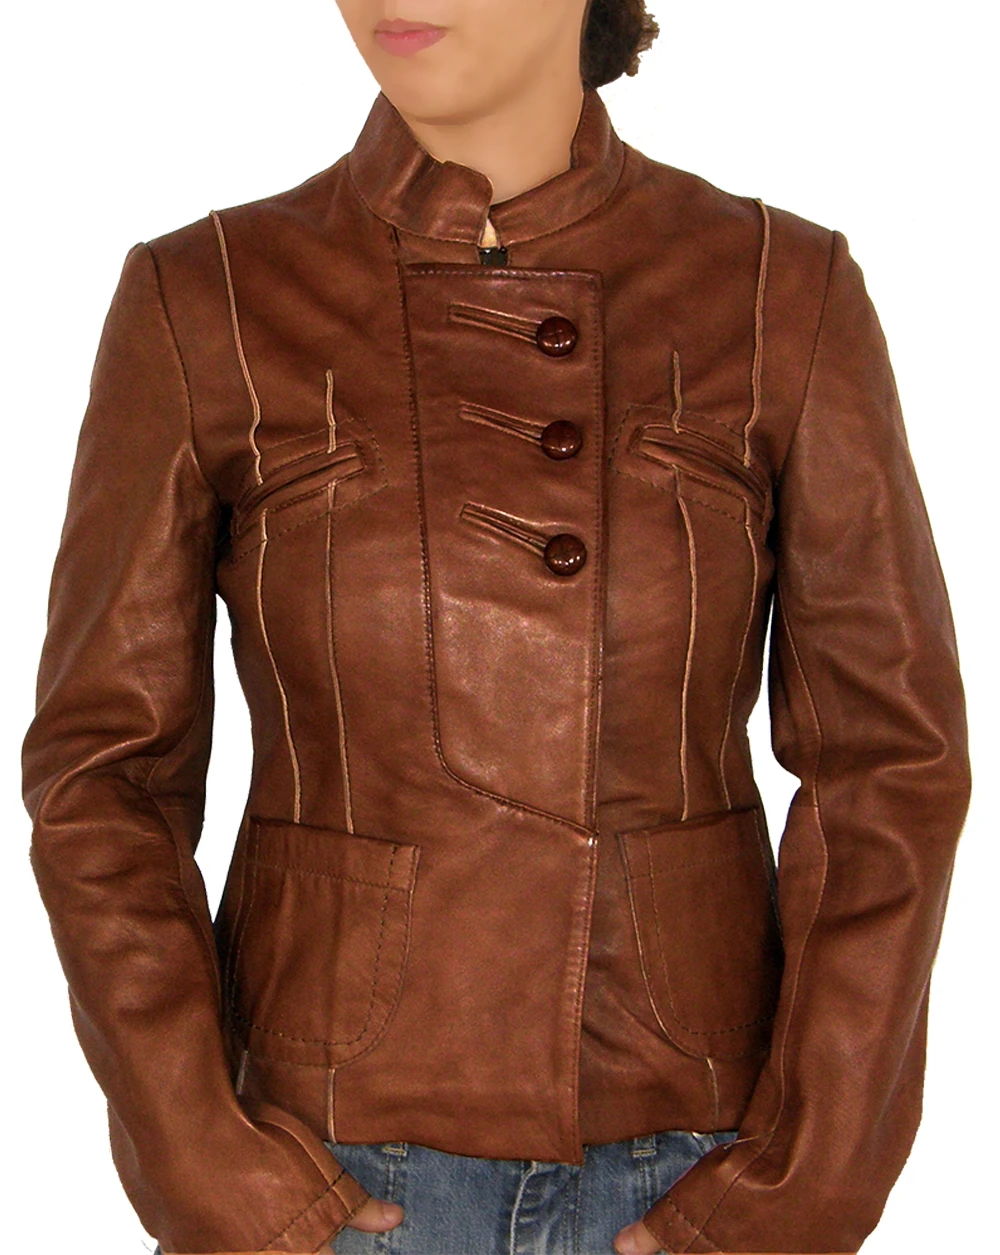 Canby zip through leather jacket